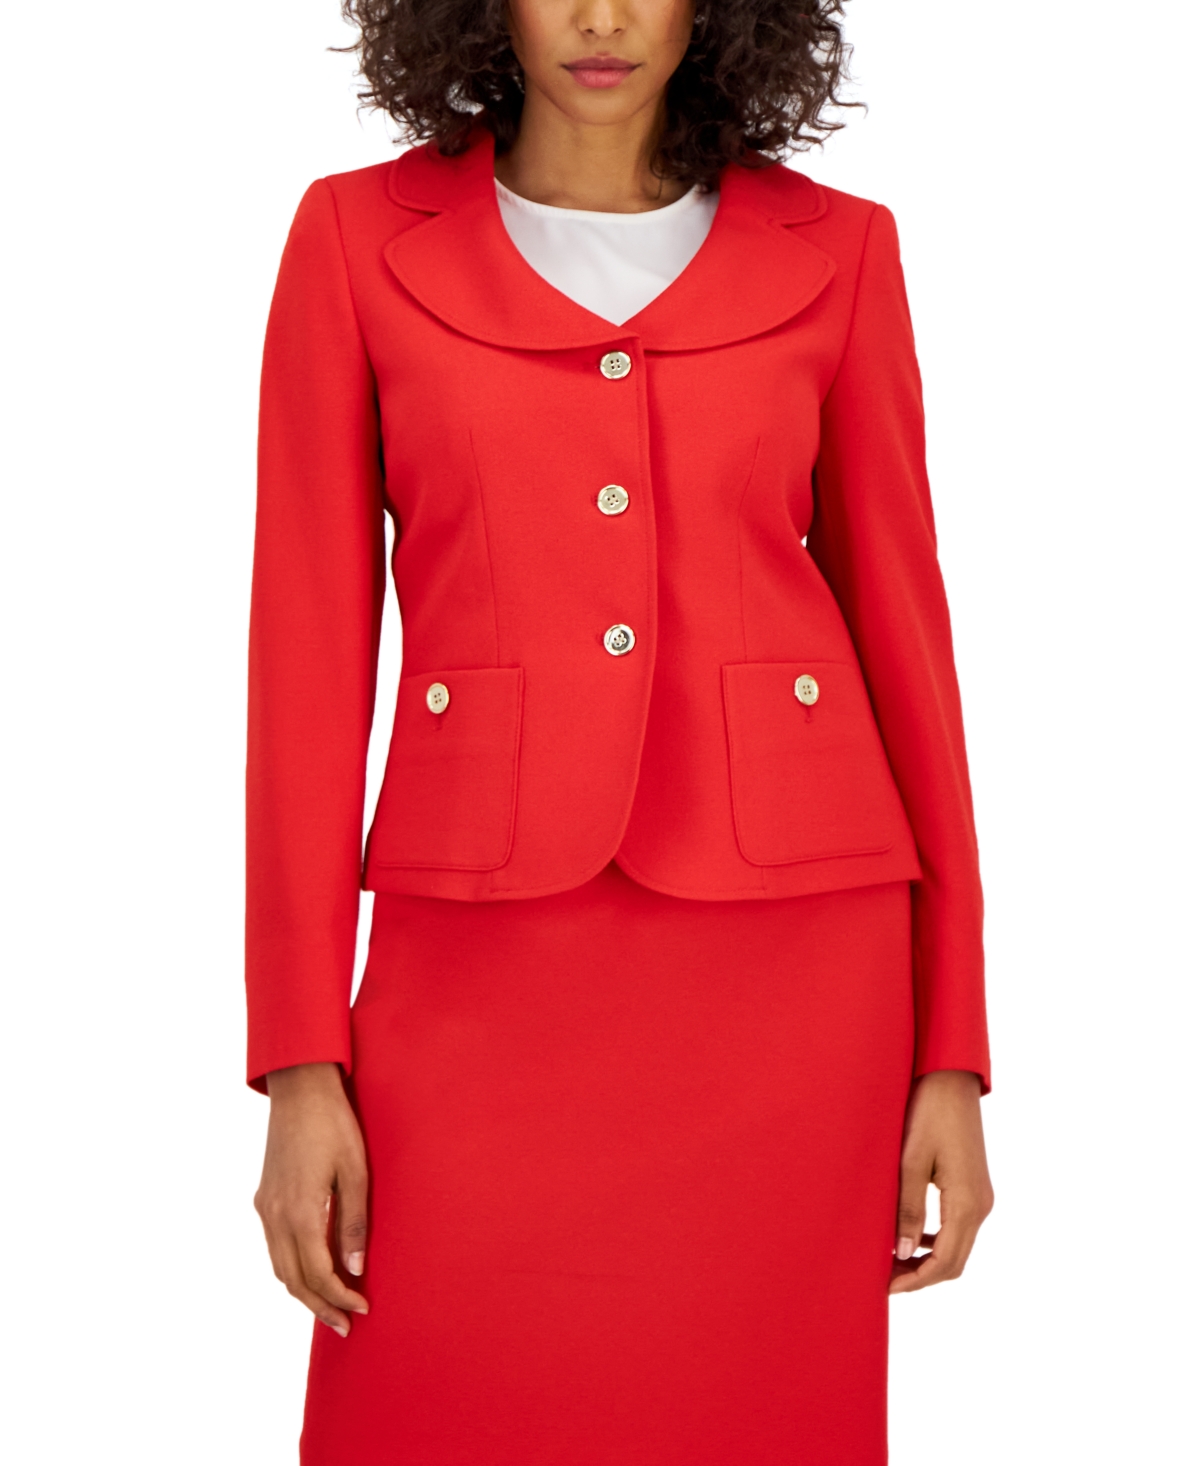 Nipon Boutique Women's Curved Collar Button-front Jacket & Pencil Skirt Suit In Cherry Sprig